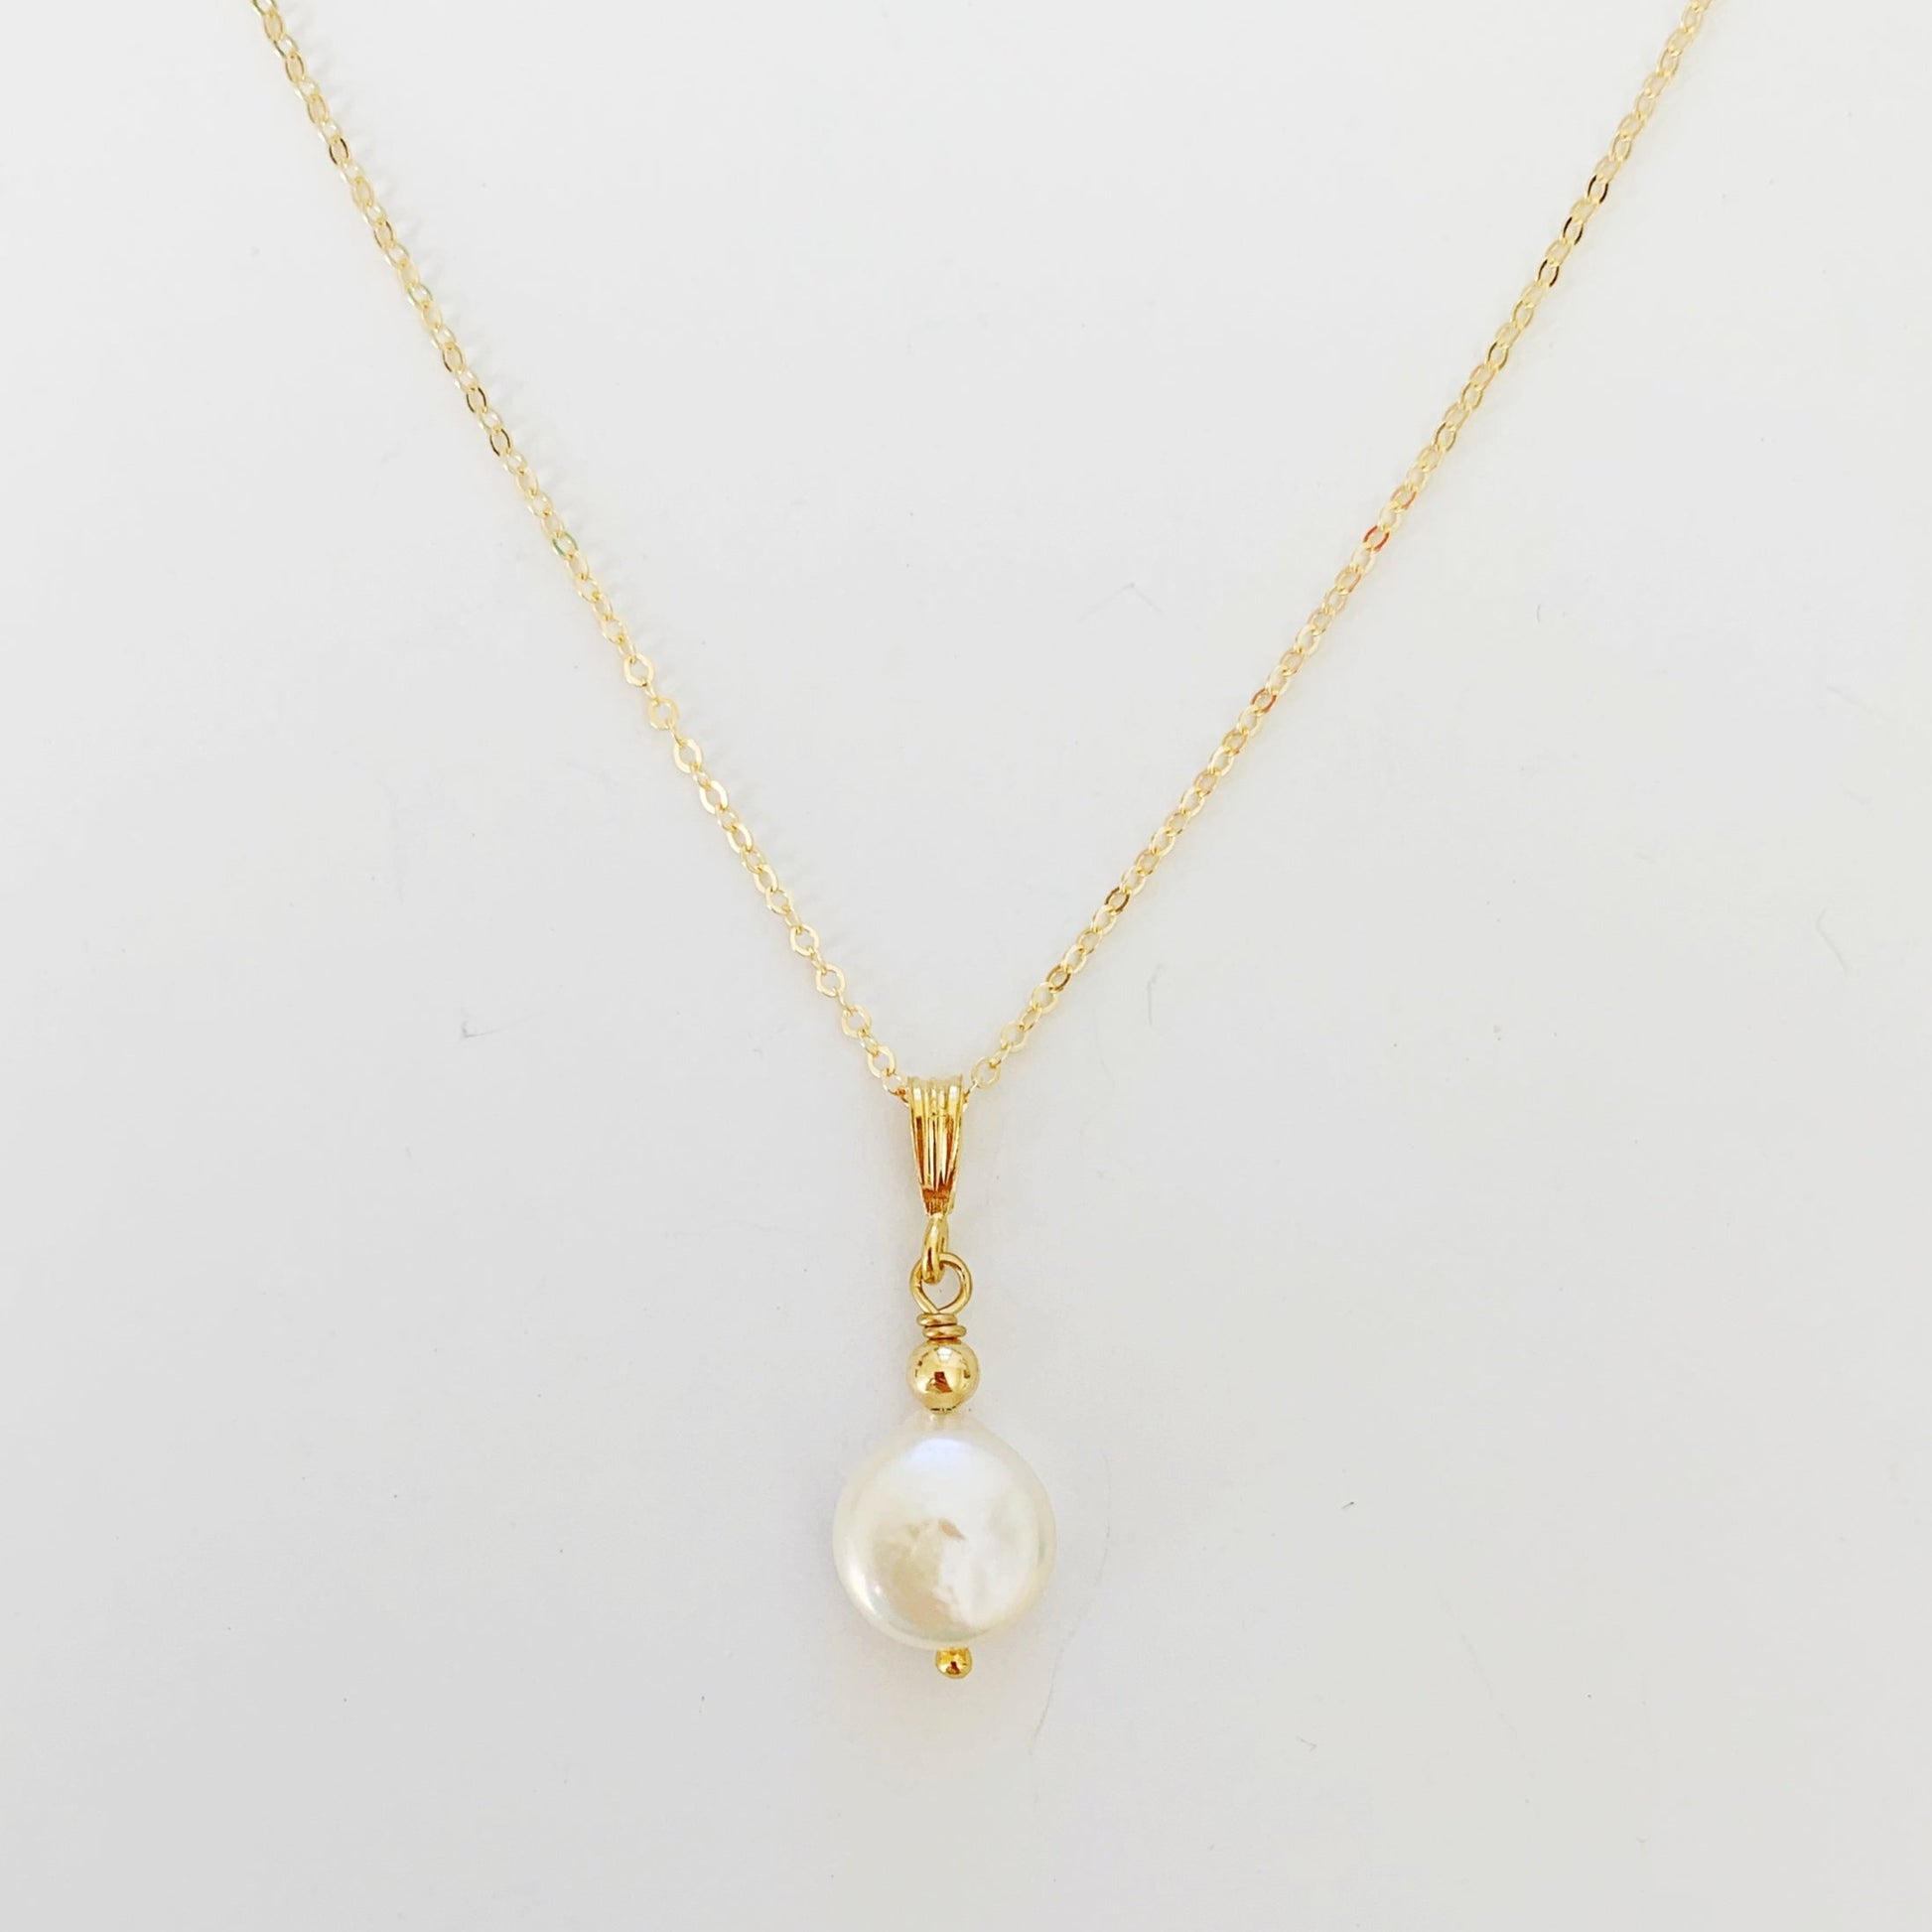 Newport Pendant featuring small freshwater coin pearl and 14k gold filled chain and findings by mermaids and madeleines. this necklace is photographed close up on a white background